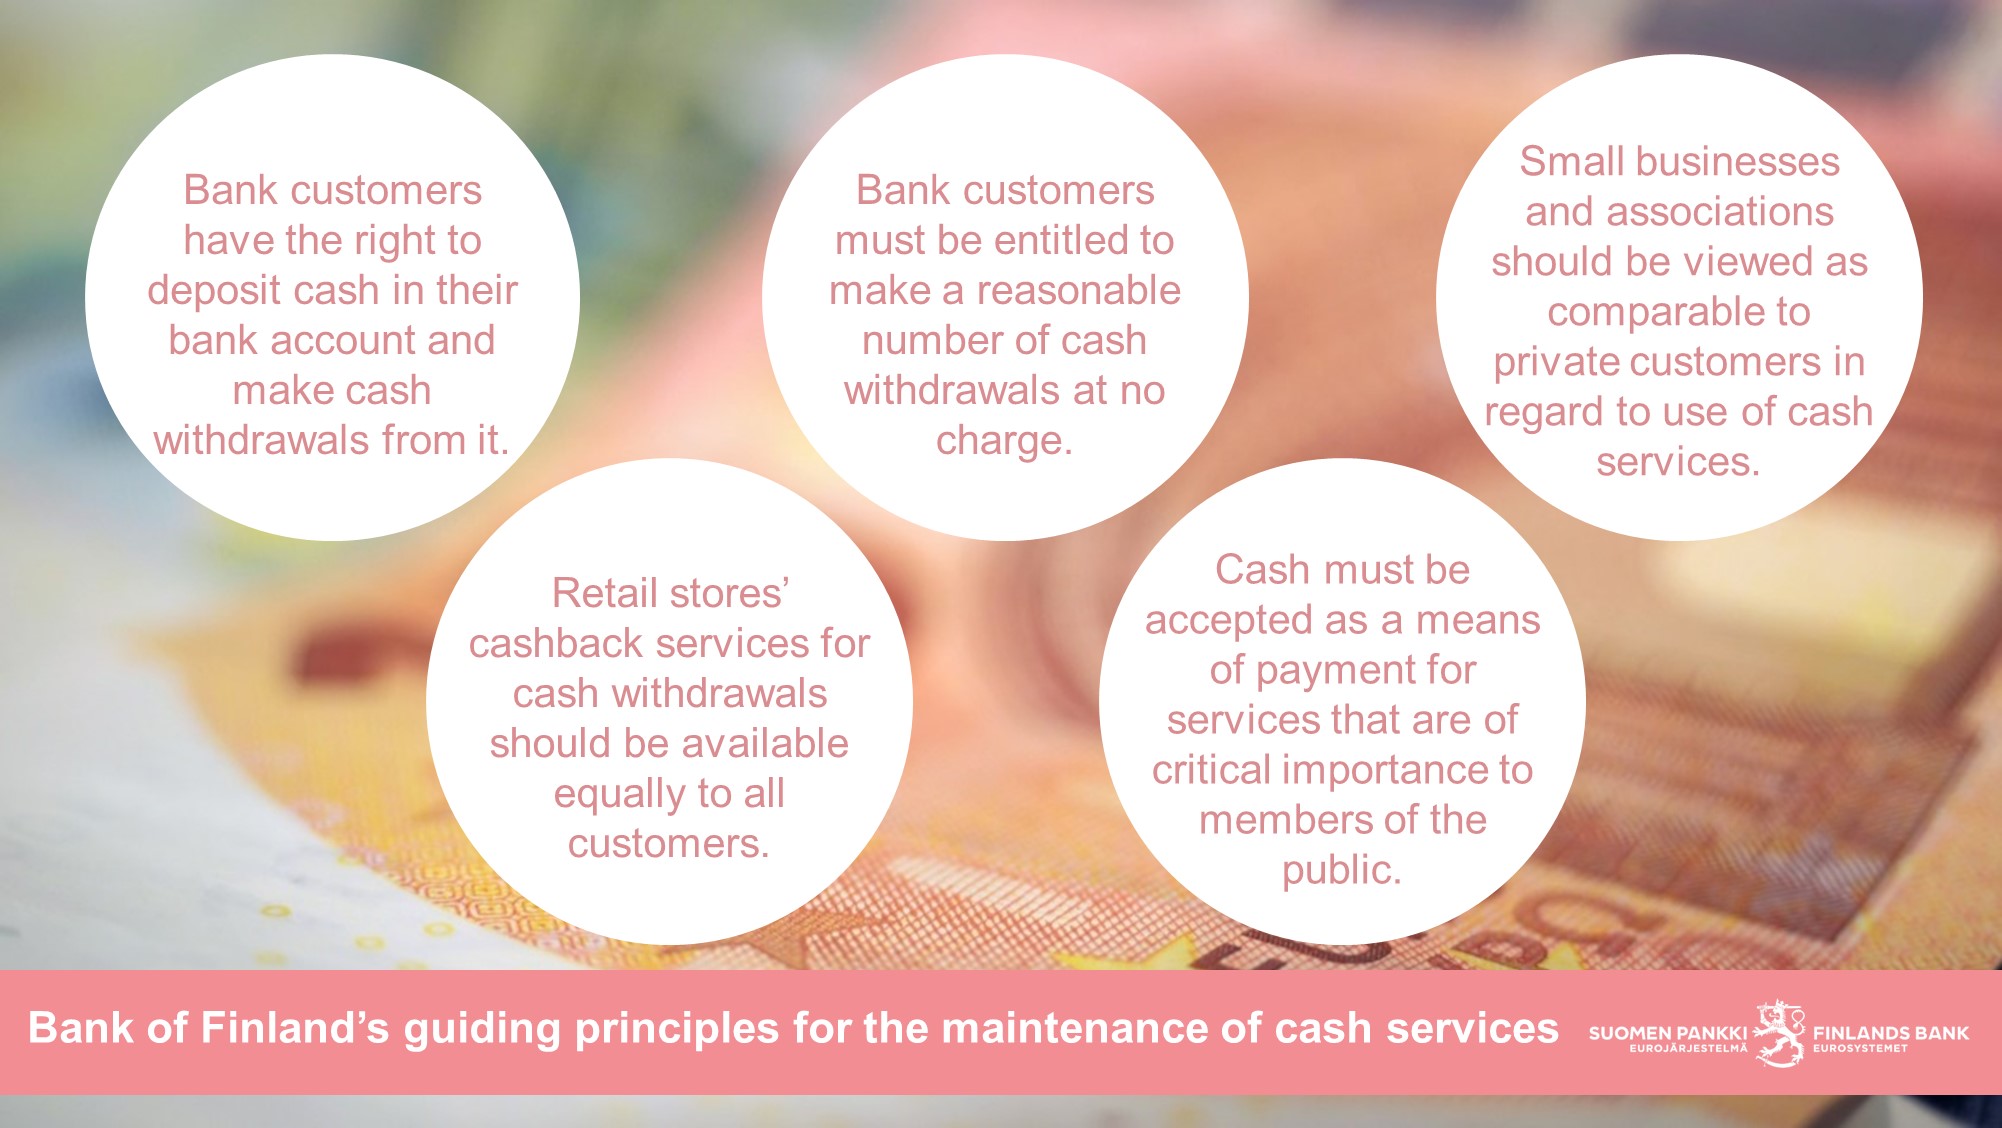 Bank of Finland’s guiding principles for the maintenance of cash services: 1. Bank customers have the right to deposit cash in their bank account and make cash withdrawals from it. 2. Bank customers must be entitled to make a reasonable number of cash withdrawals at no charge. 3. Small businesses and associations should be viewed as comparable to private customers in regard to use of cash services. 4. Retail stores’ cashback services for cash withdrawals should be available equally to all customers. 5. Cash must be accepted as a means of payment for services that are of critical importance to members of the public.